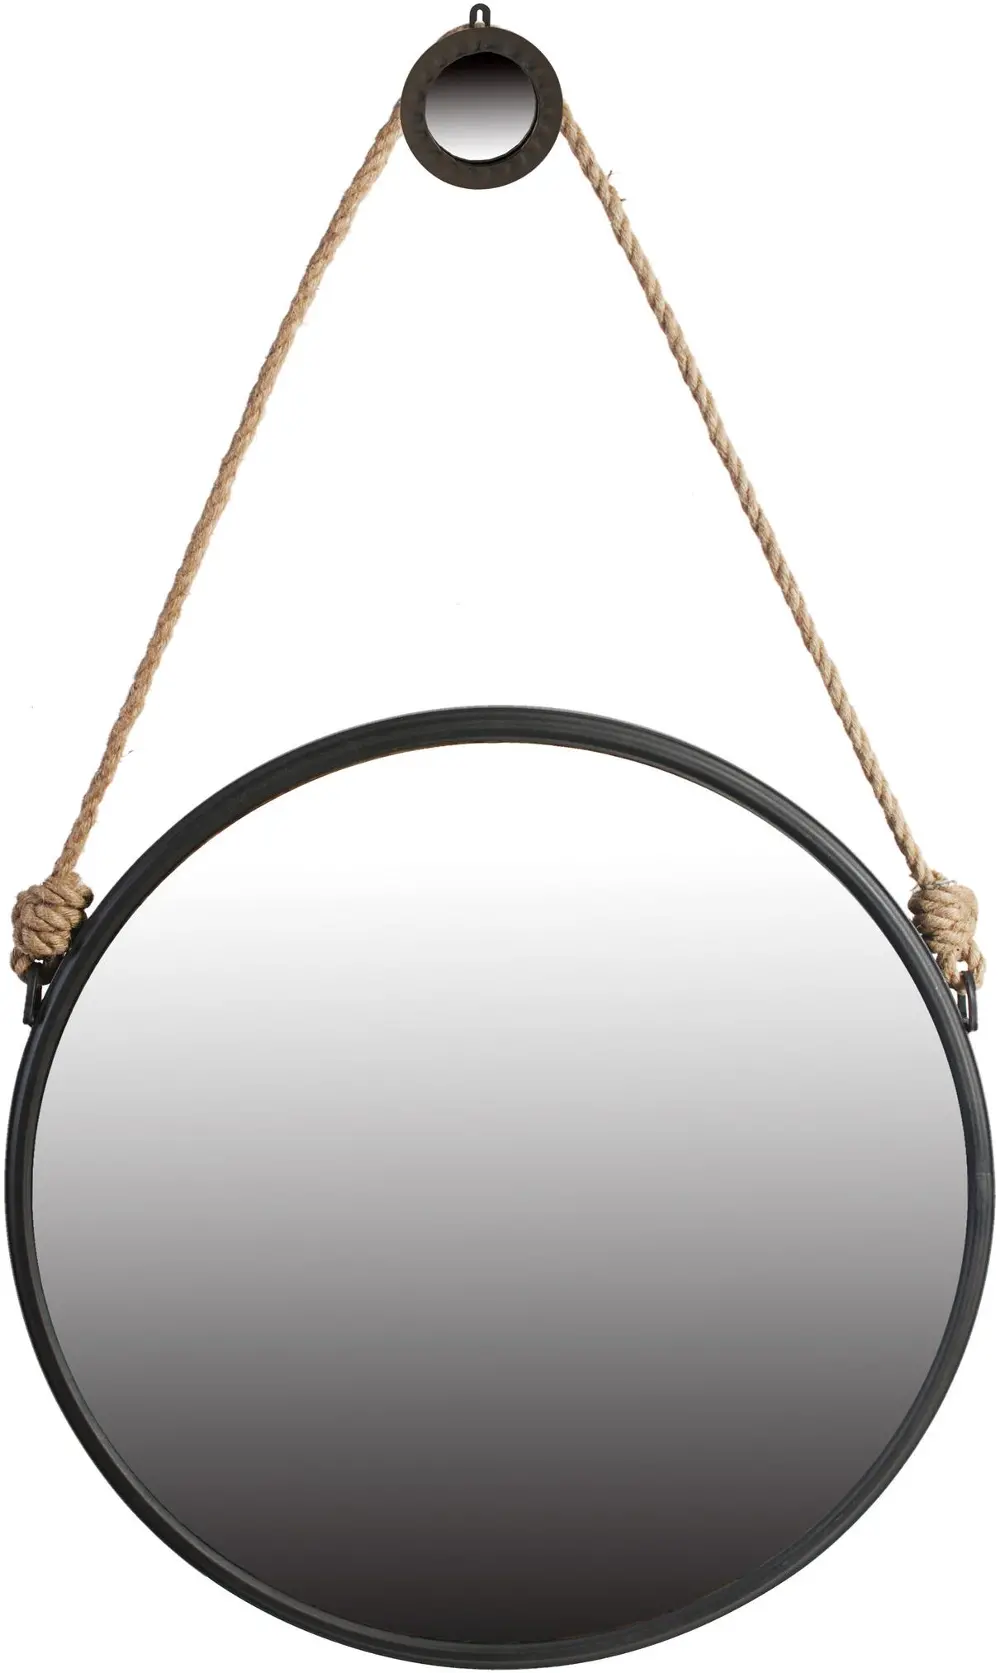 19 Inch Hanging Round Mirror with Rope-1